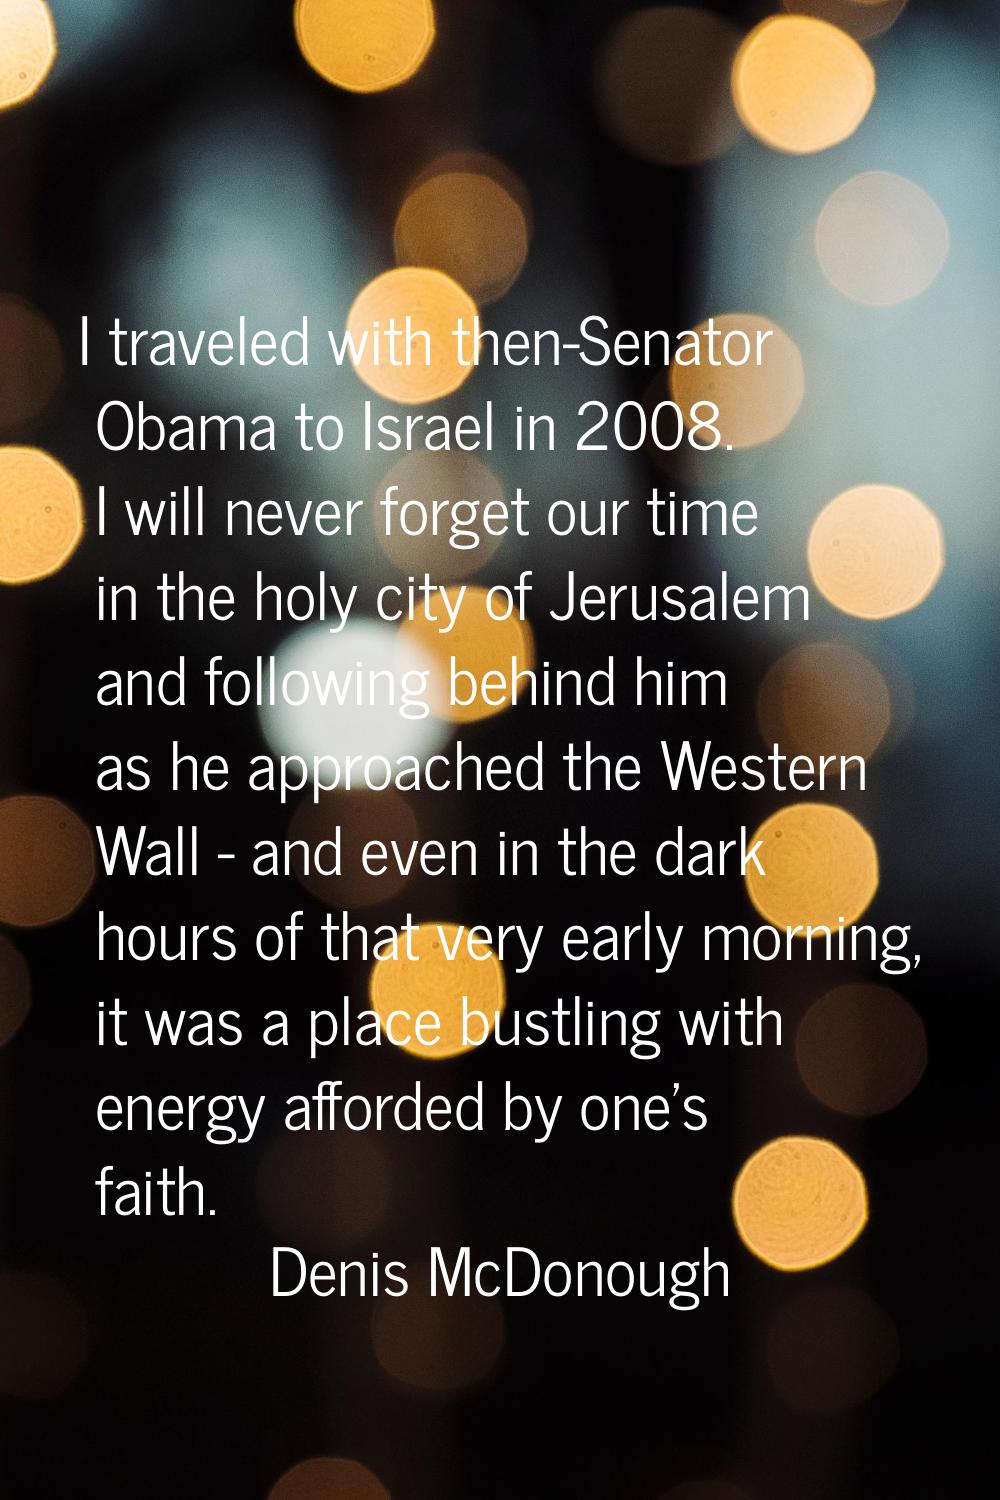 I traveled with then-Senator Obama to Israel in 2008. I will never forget our time in the holy city